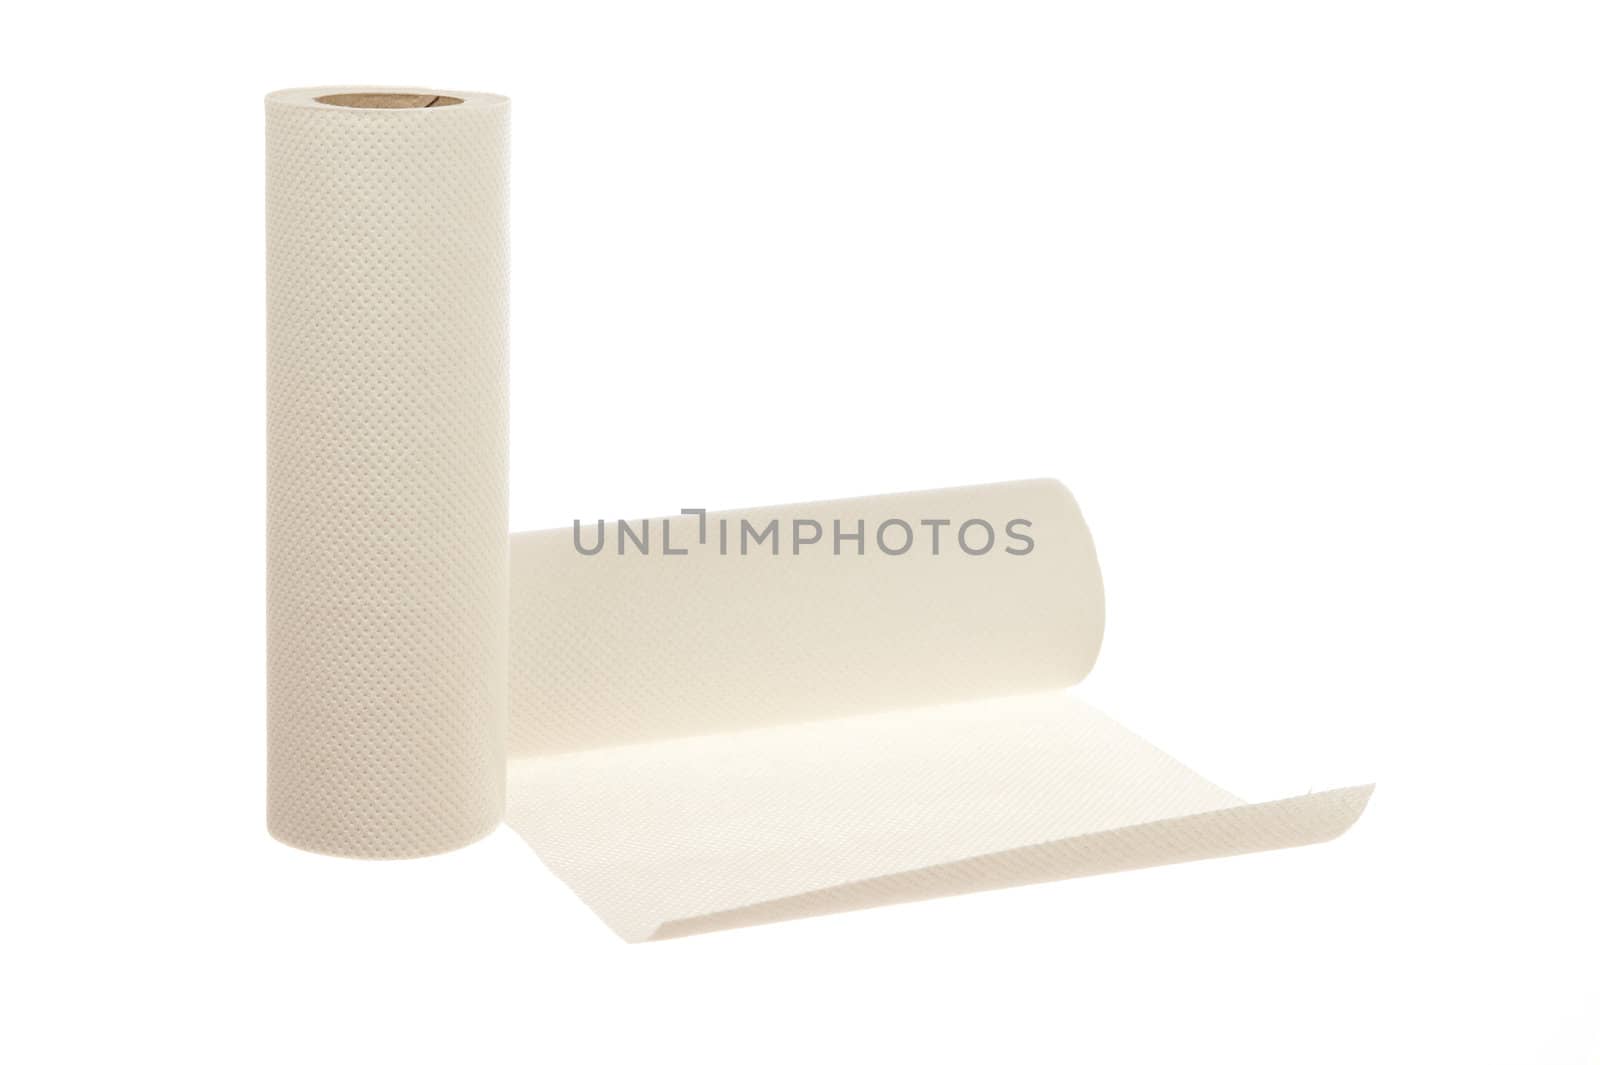 Rolls of paper towel isolated on white background by Eydfinnur